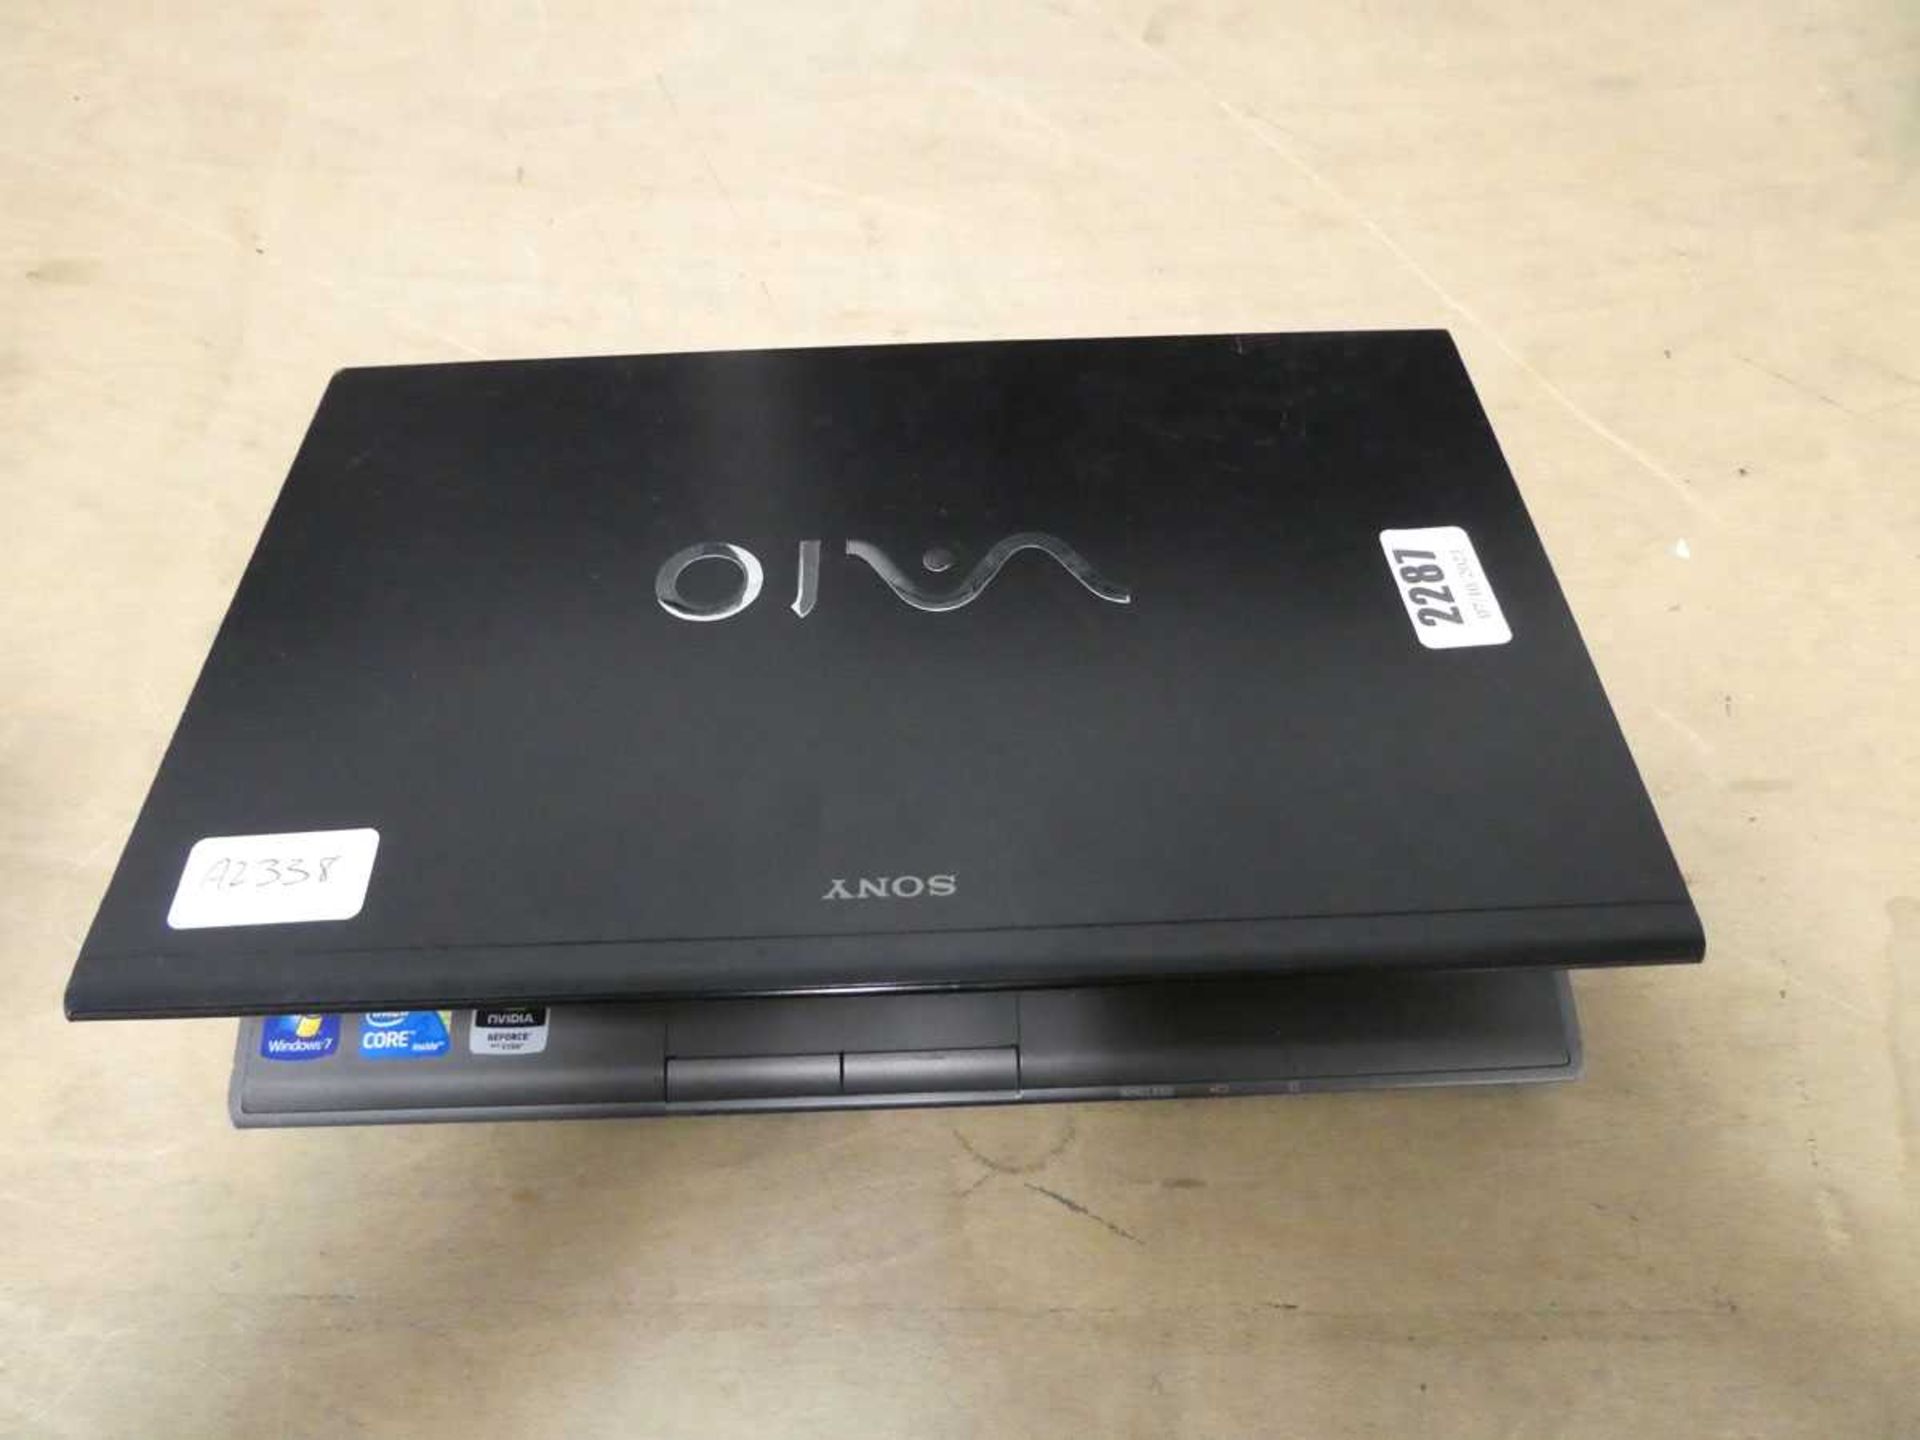 Sony Vaio notebook computer (no charger, possibly spares & repairs) - Image 2 of 2